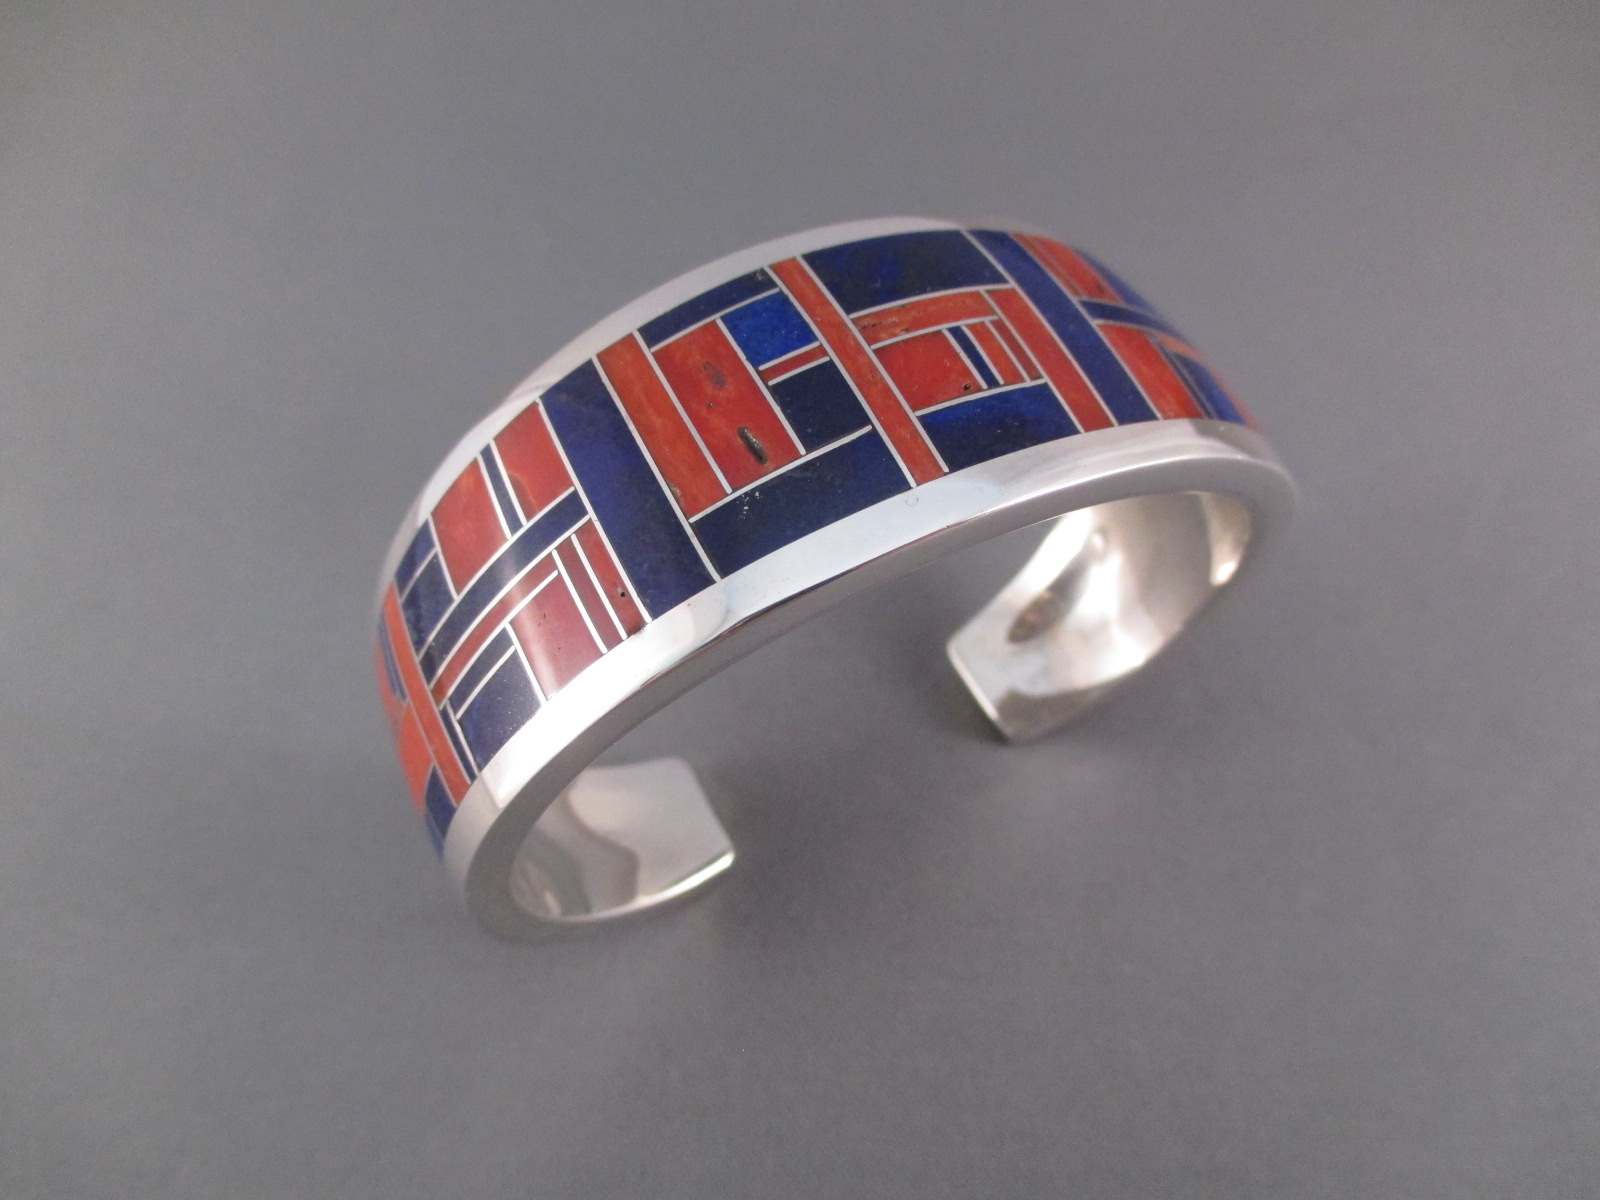 Lapis & Coral Inlay Cuff Bracelet by Native American Navajo Indian Jewelry artist, Ray Tracey $695-